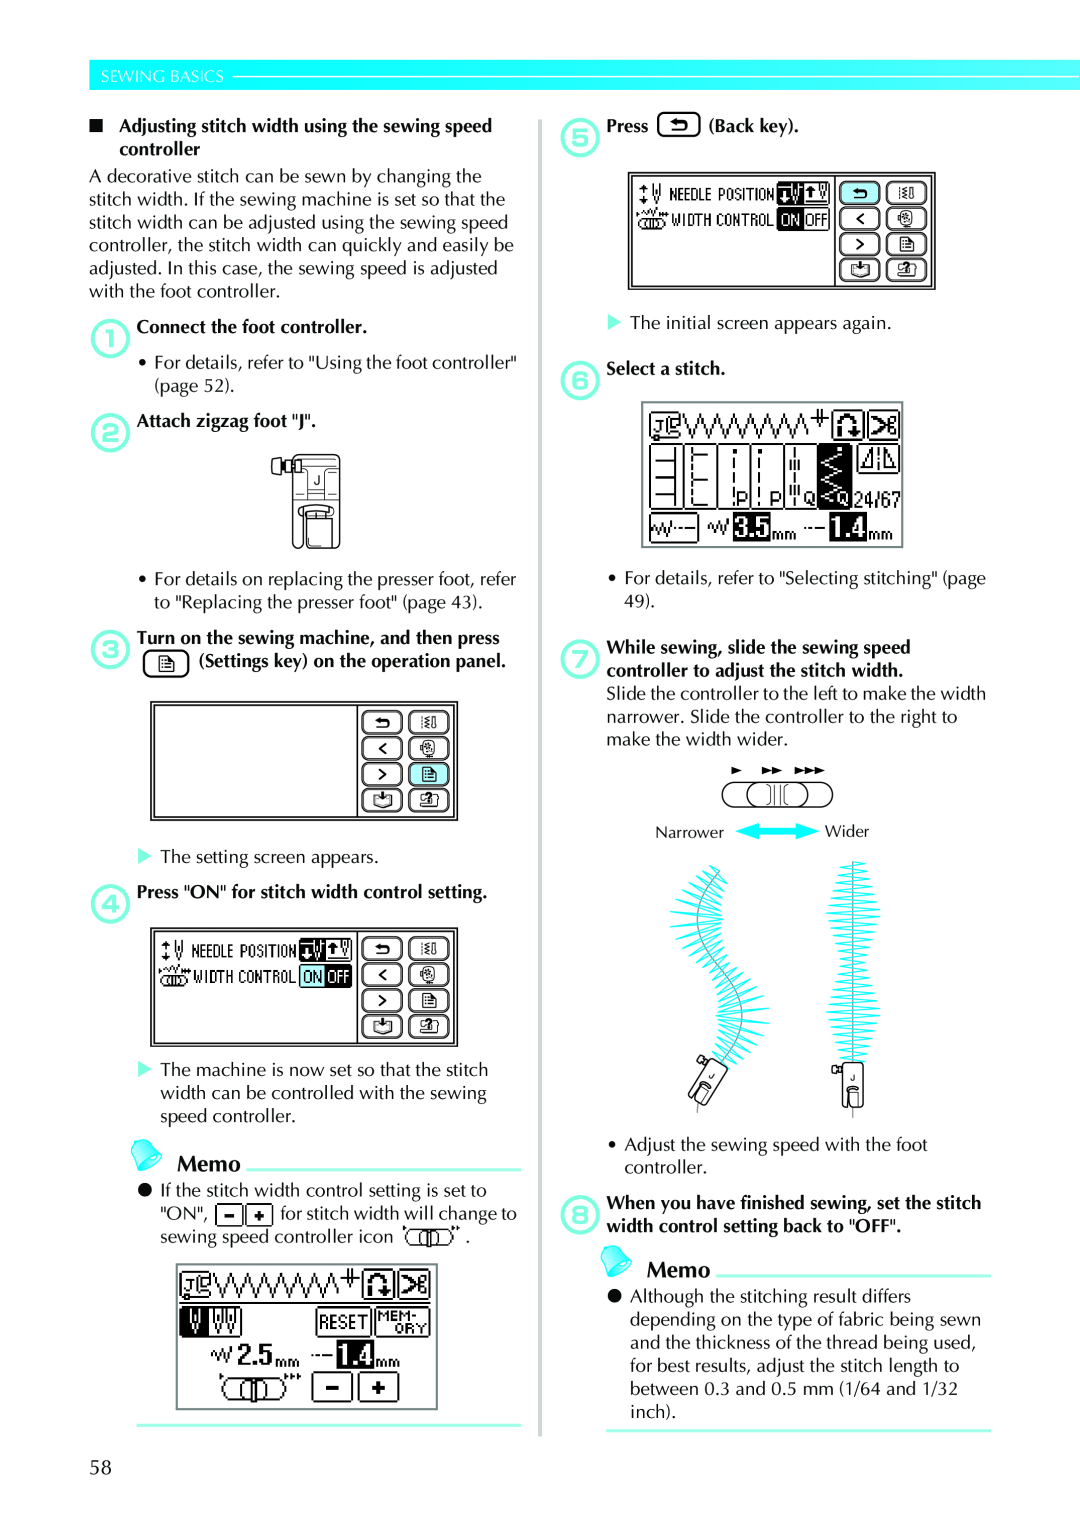 Brother 885-V33 Memo, Sewing Basics, Adjusting stitch width using the sewing speed controller, bAttach zigzag foot J 